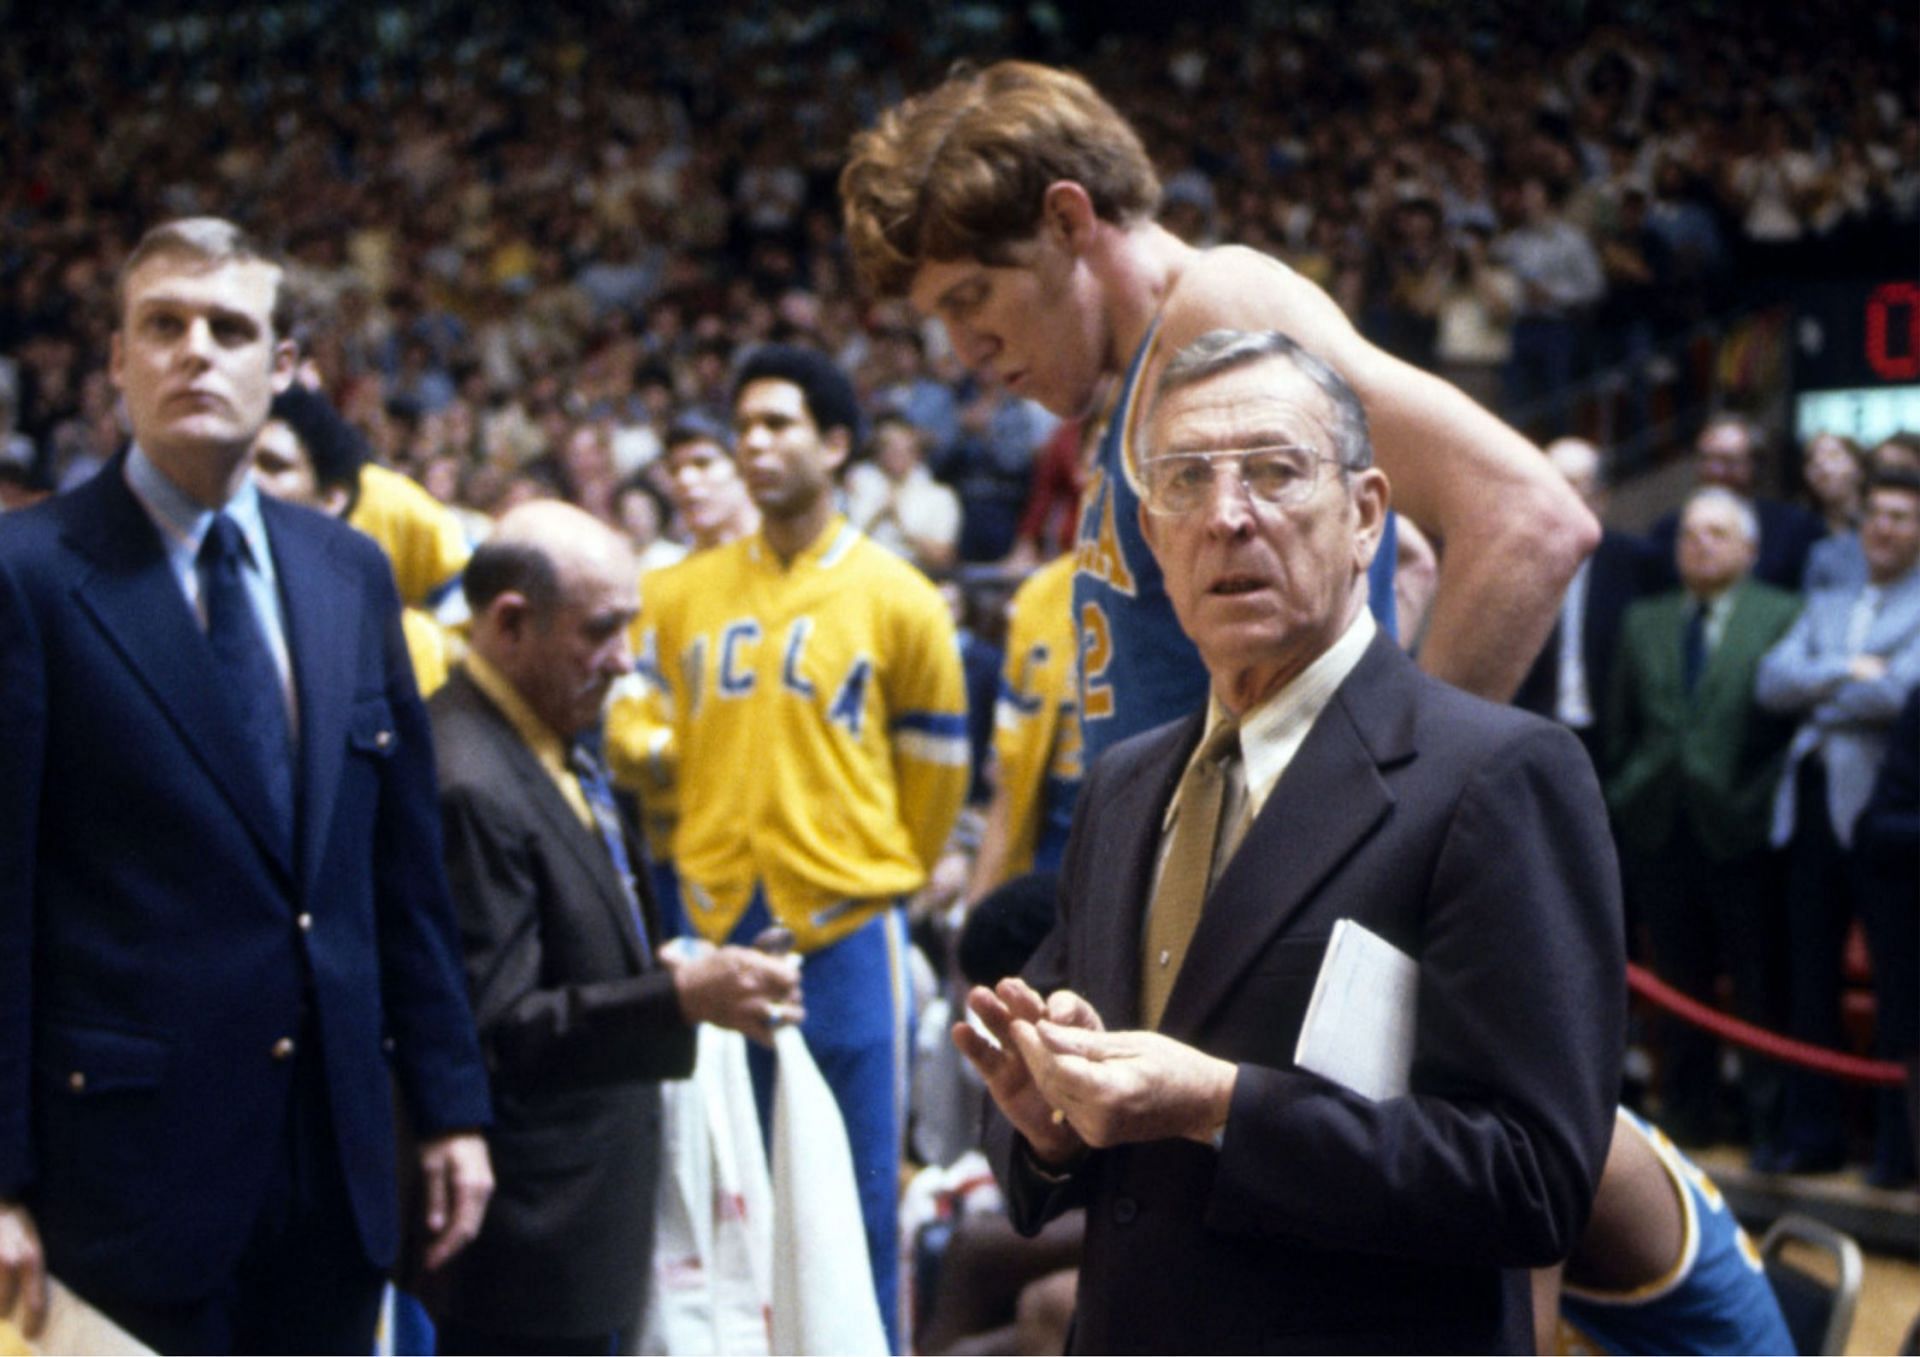 Legendary coach John Wooden led Bill Walton and the UCLA Bruins to two NCAA championships during Walton